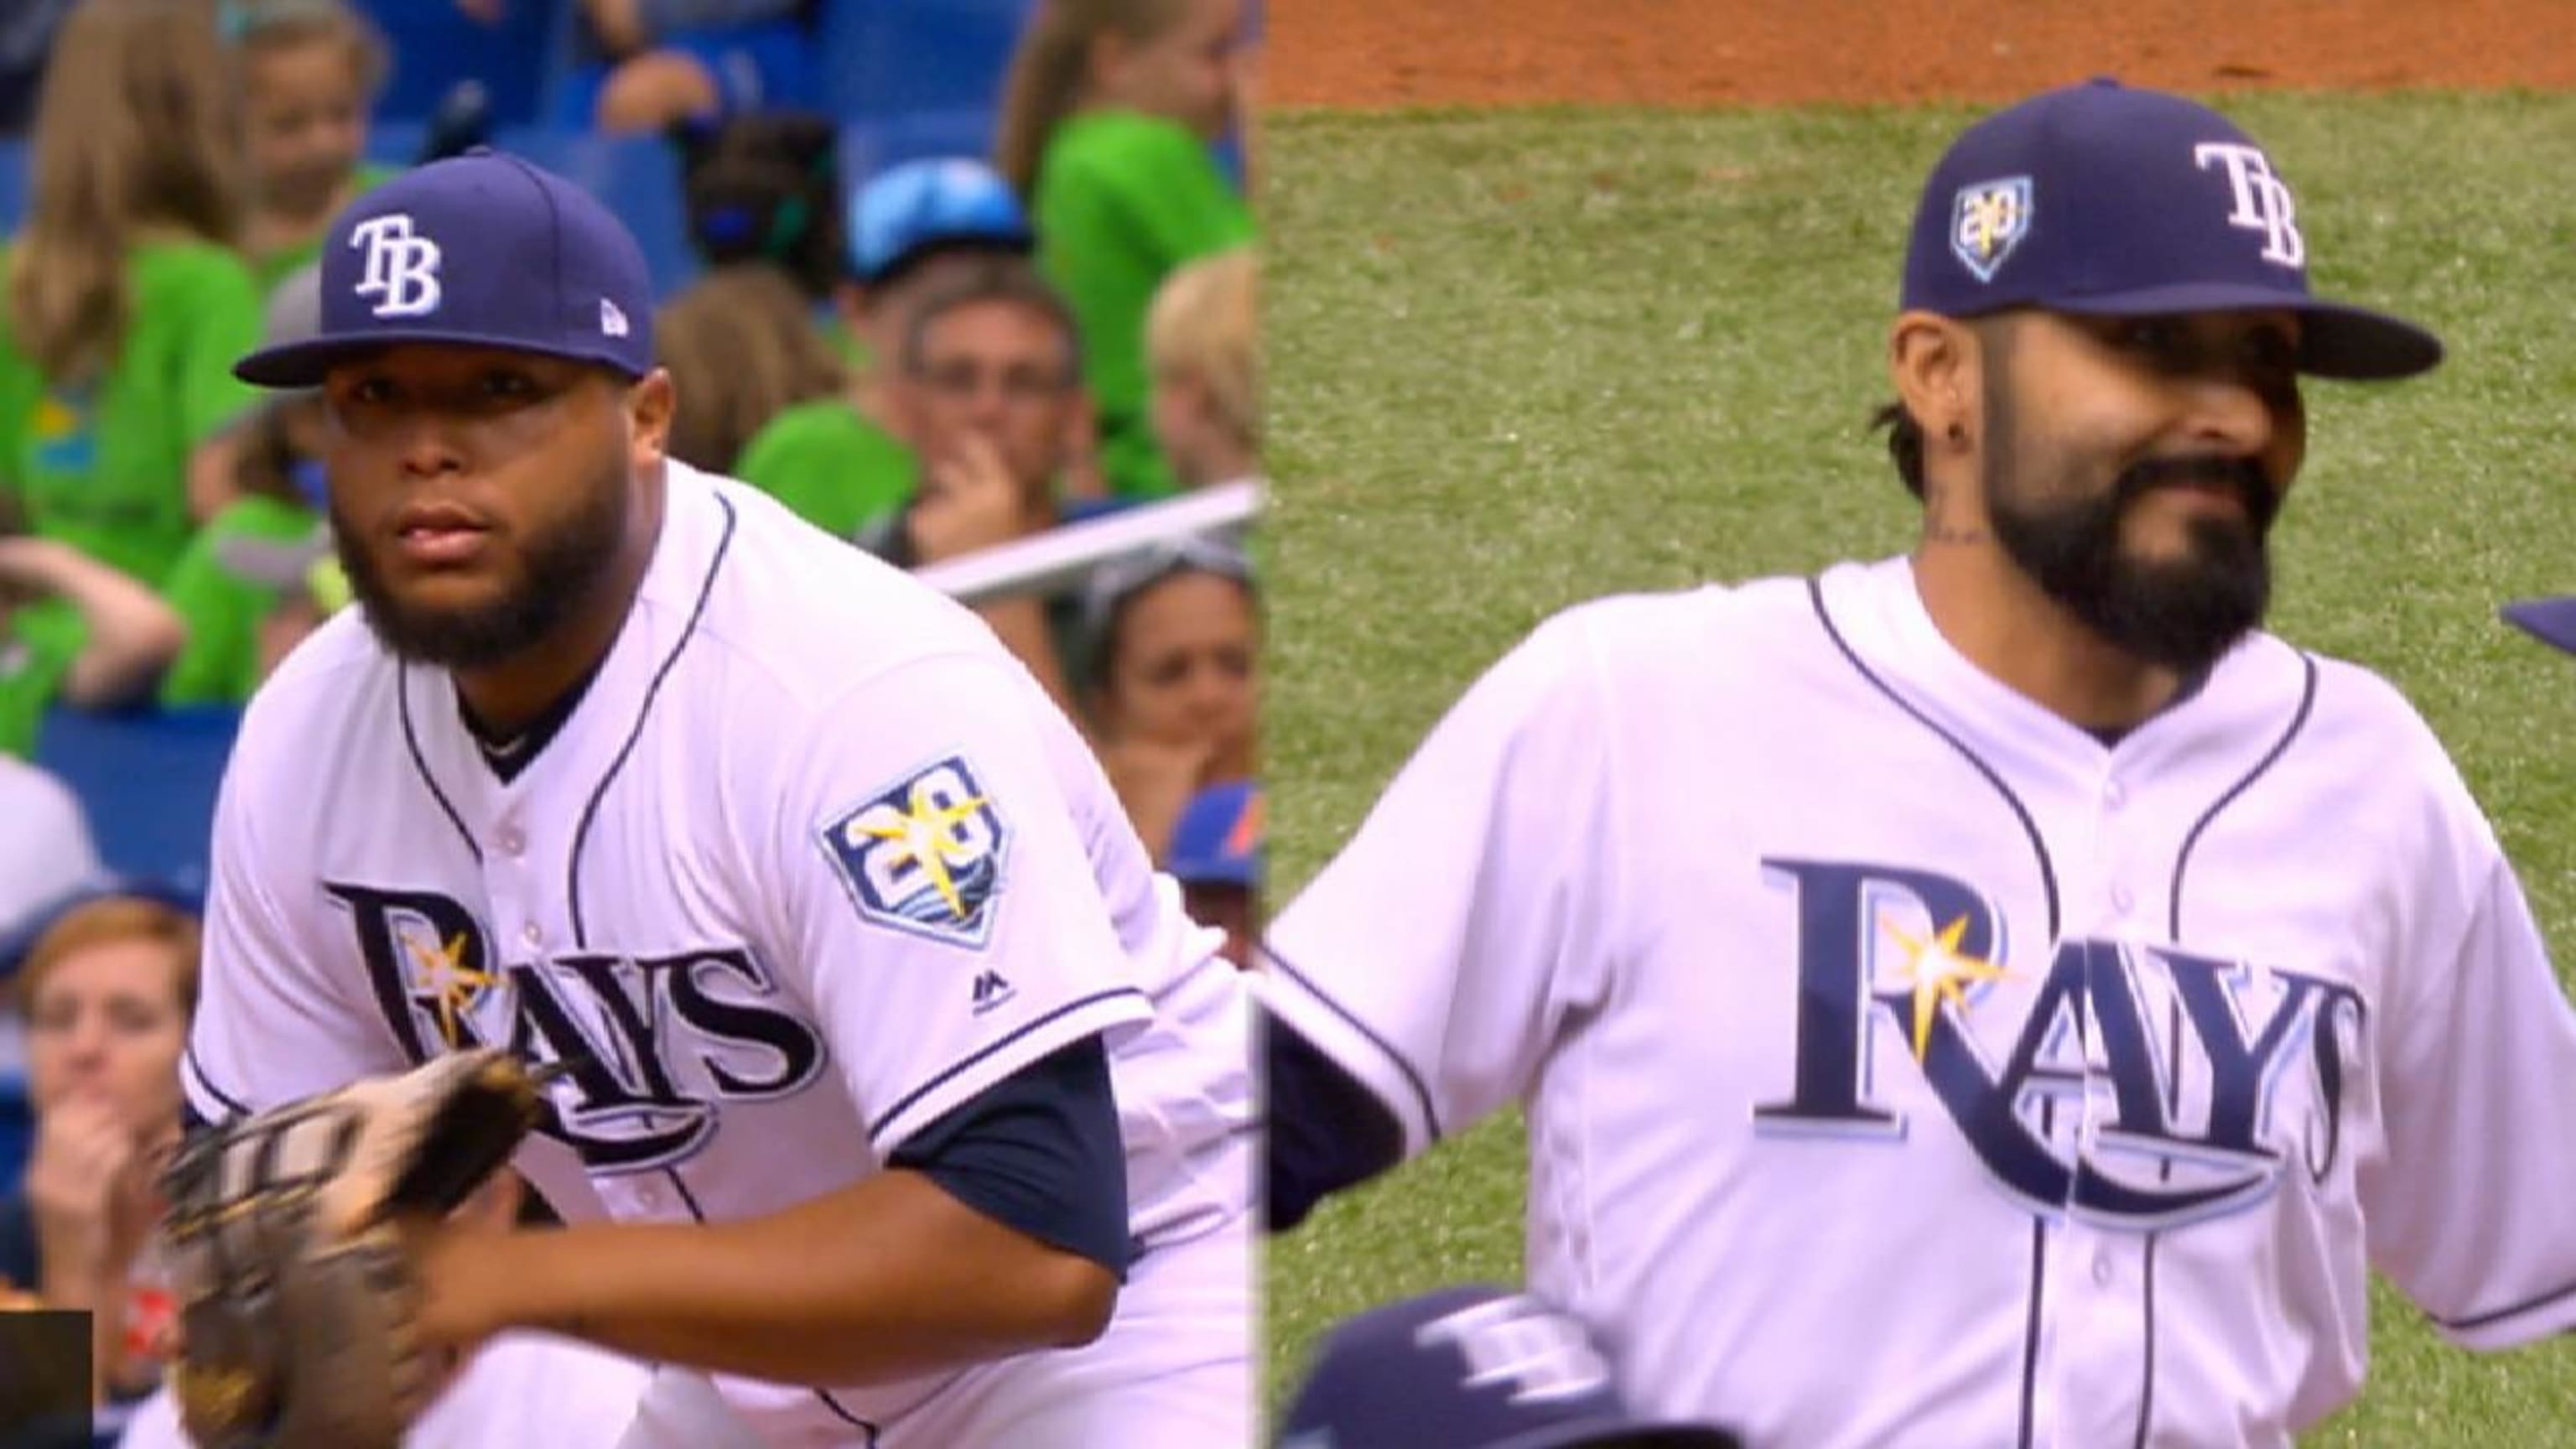 The Rays played reliever Jose Alvarado at first base as part of some  serious bullpen shenanigans